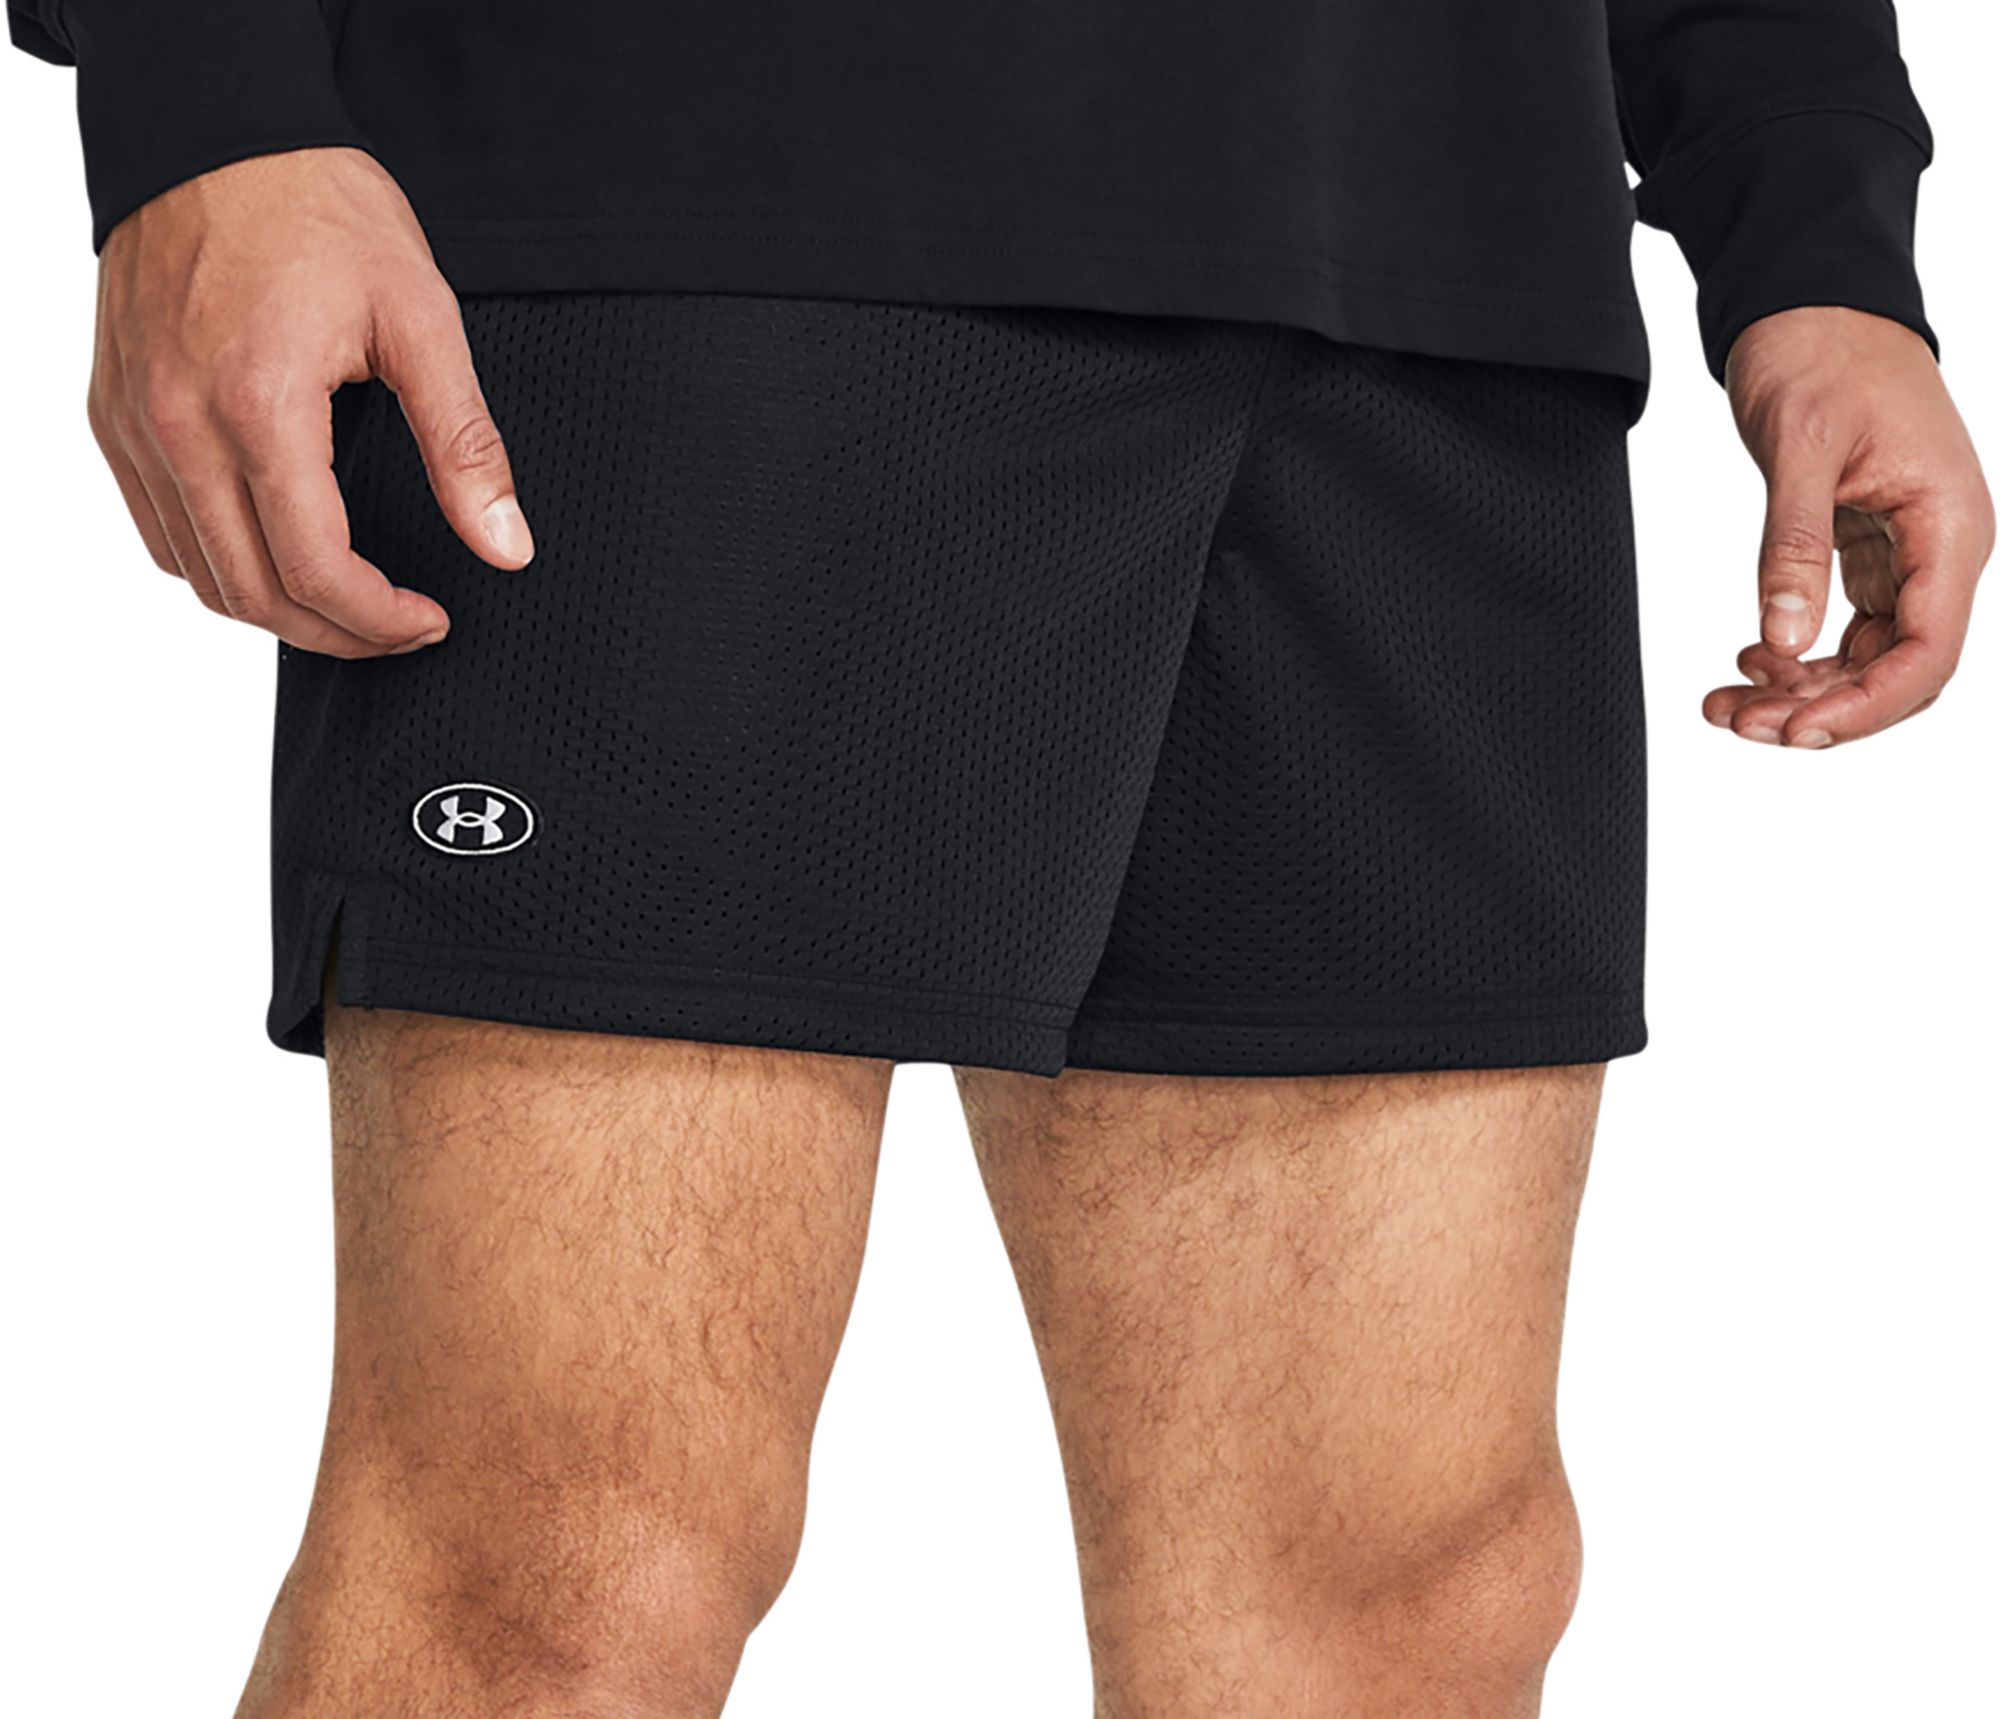 Under Armour Mens Icon Mesh Shorts